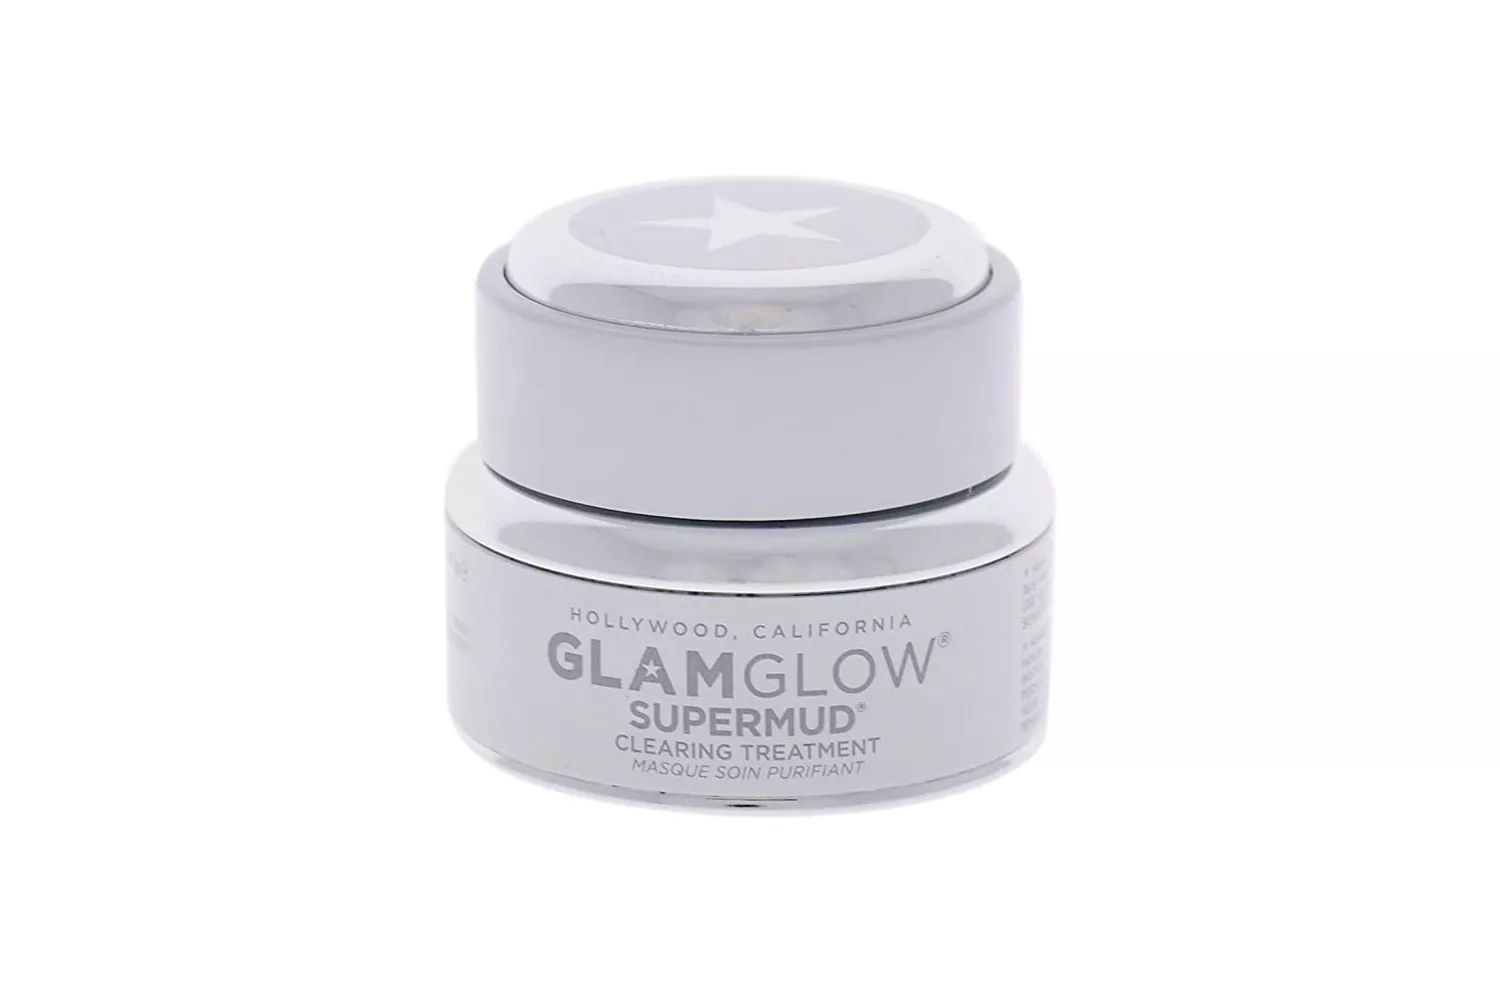 The Best Mask Acne Treatments: GLAMGLOW SUPERMUD Charcoal Instant Clearing Treatment Mask